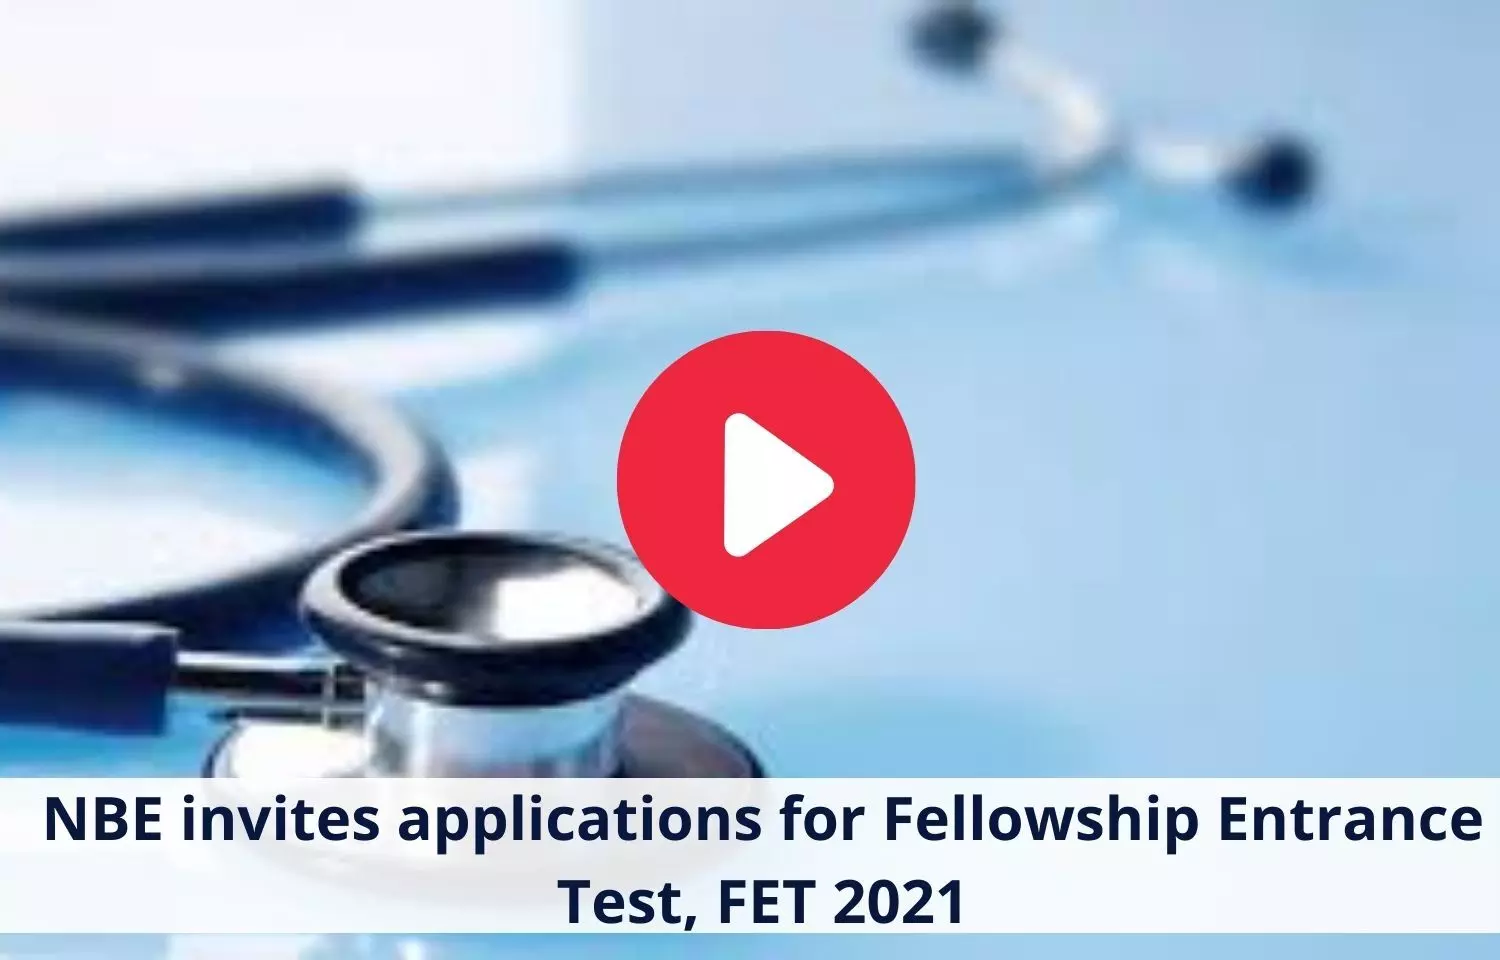 NBE invites applications for FET 2021